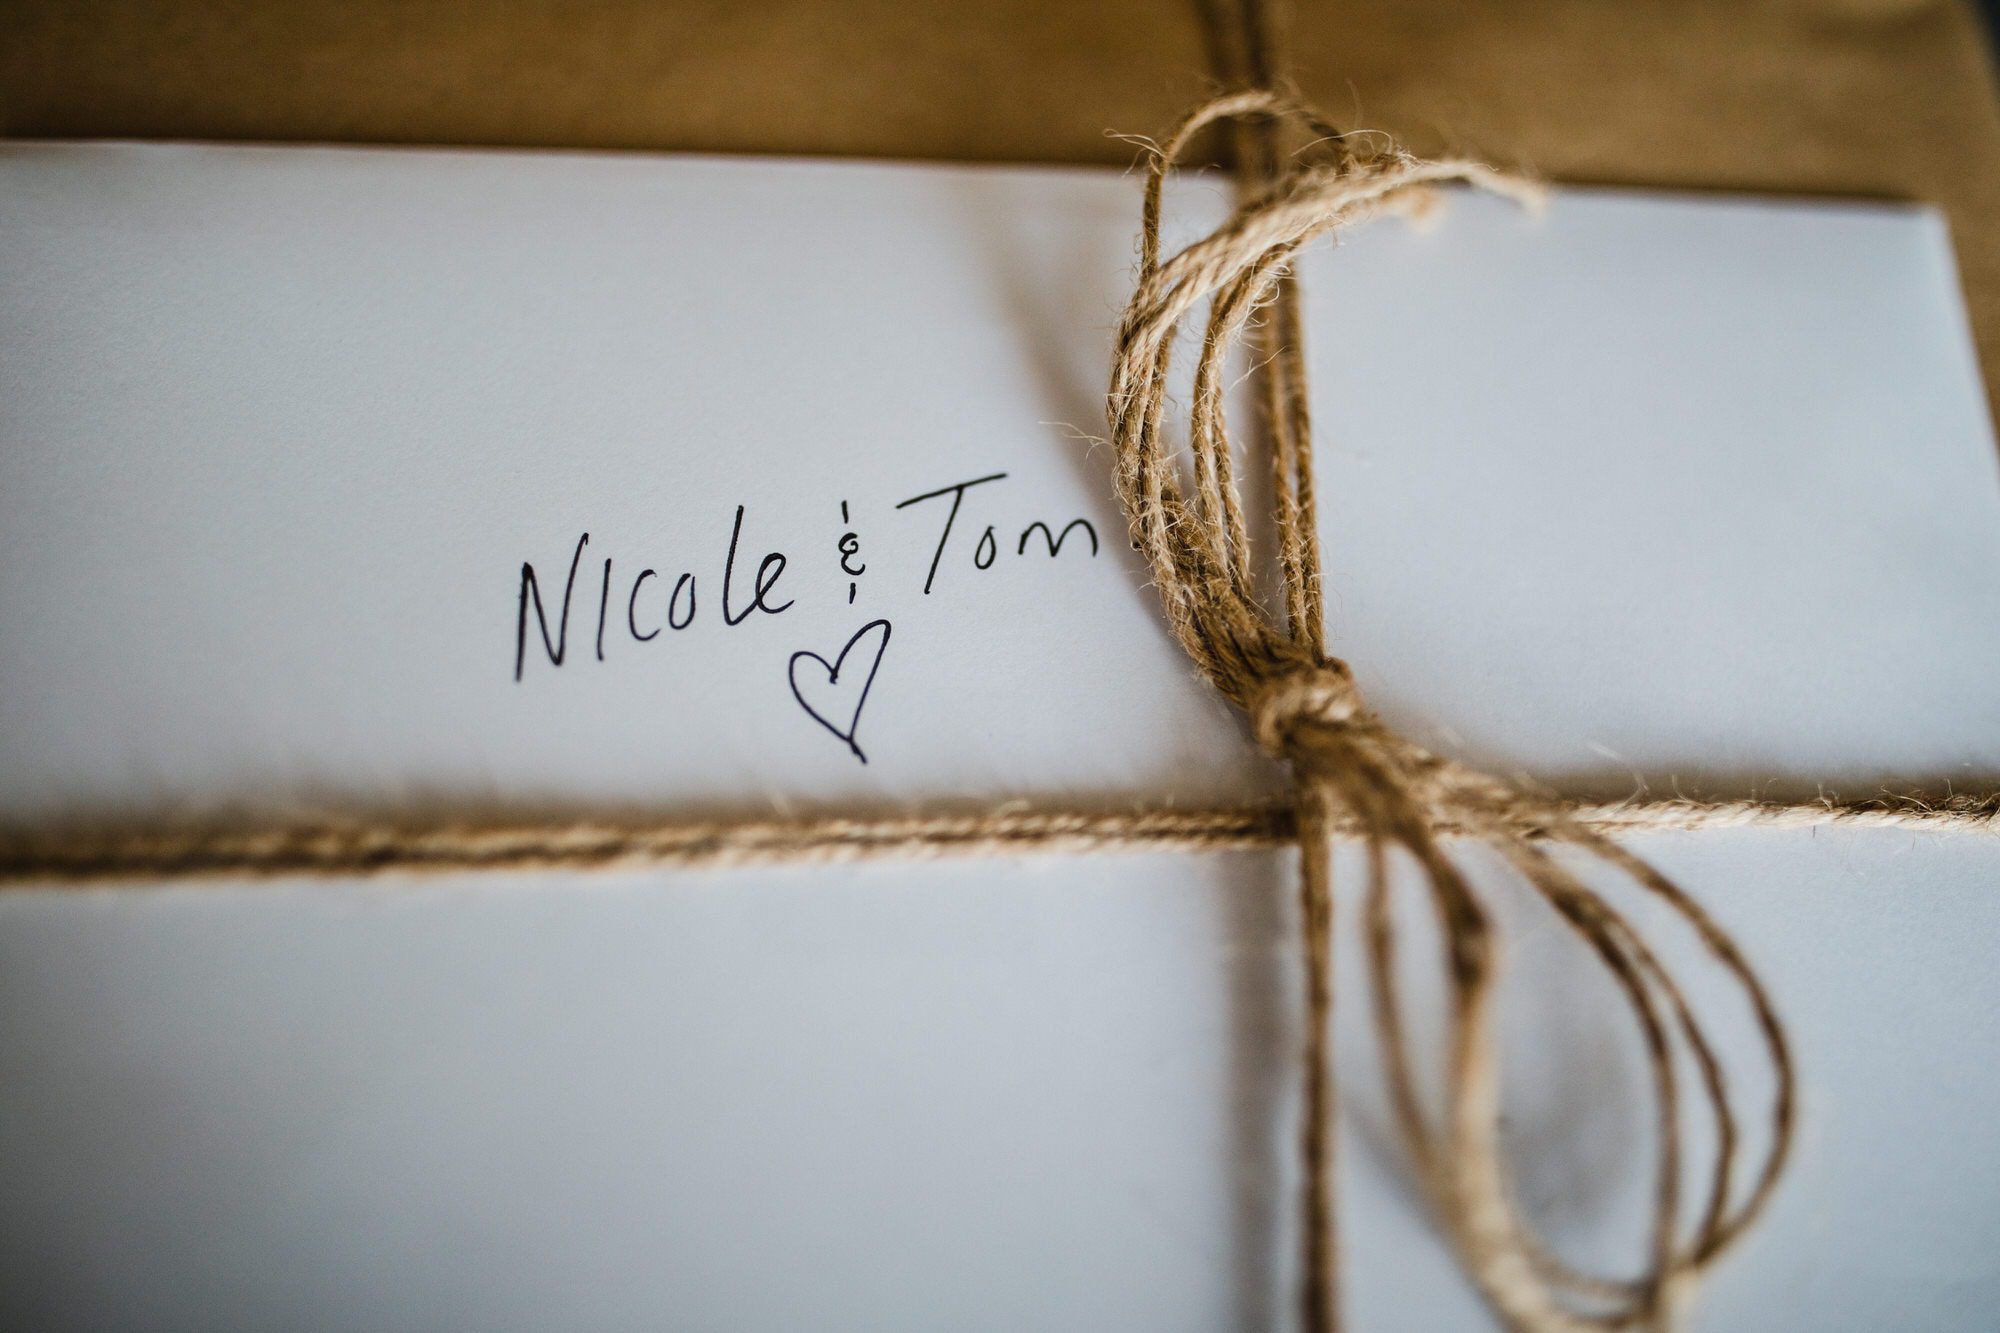 Wedding gift wrapped with twine. Destination wedding photographer Brent Calis.